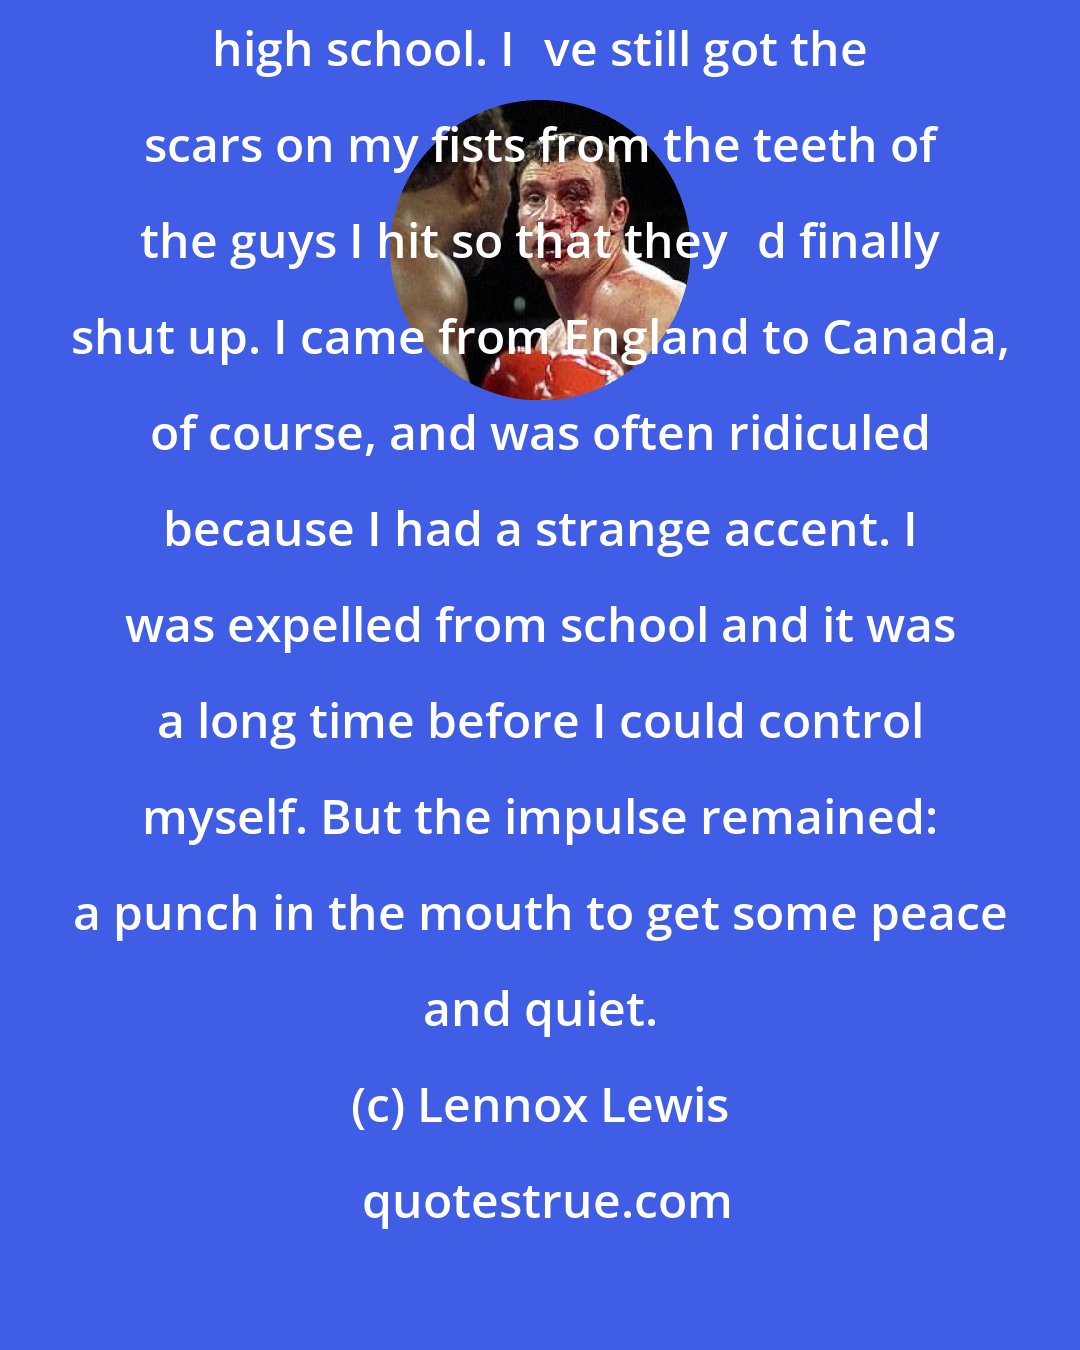 Lennox Lewis: I could never stand big-mouthed types. I had problems with that at high school. Ive still got the scars on my fists from the teeth of the guys I hit so that theyd finally shut up. I came from England to Canada, of course, and was often ridiculed because I had a strange accent. I was expelled from school and it was a long time before I could control myself. But the impulse remained: a punch in the mouth to get some peace and quiet.